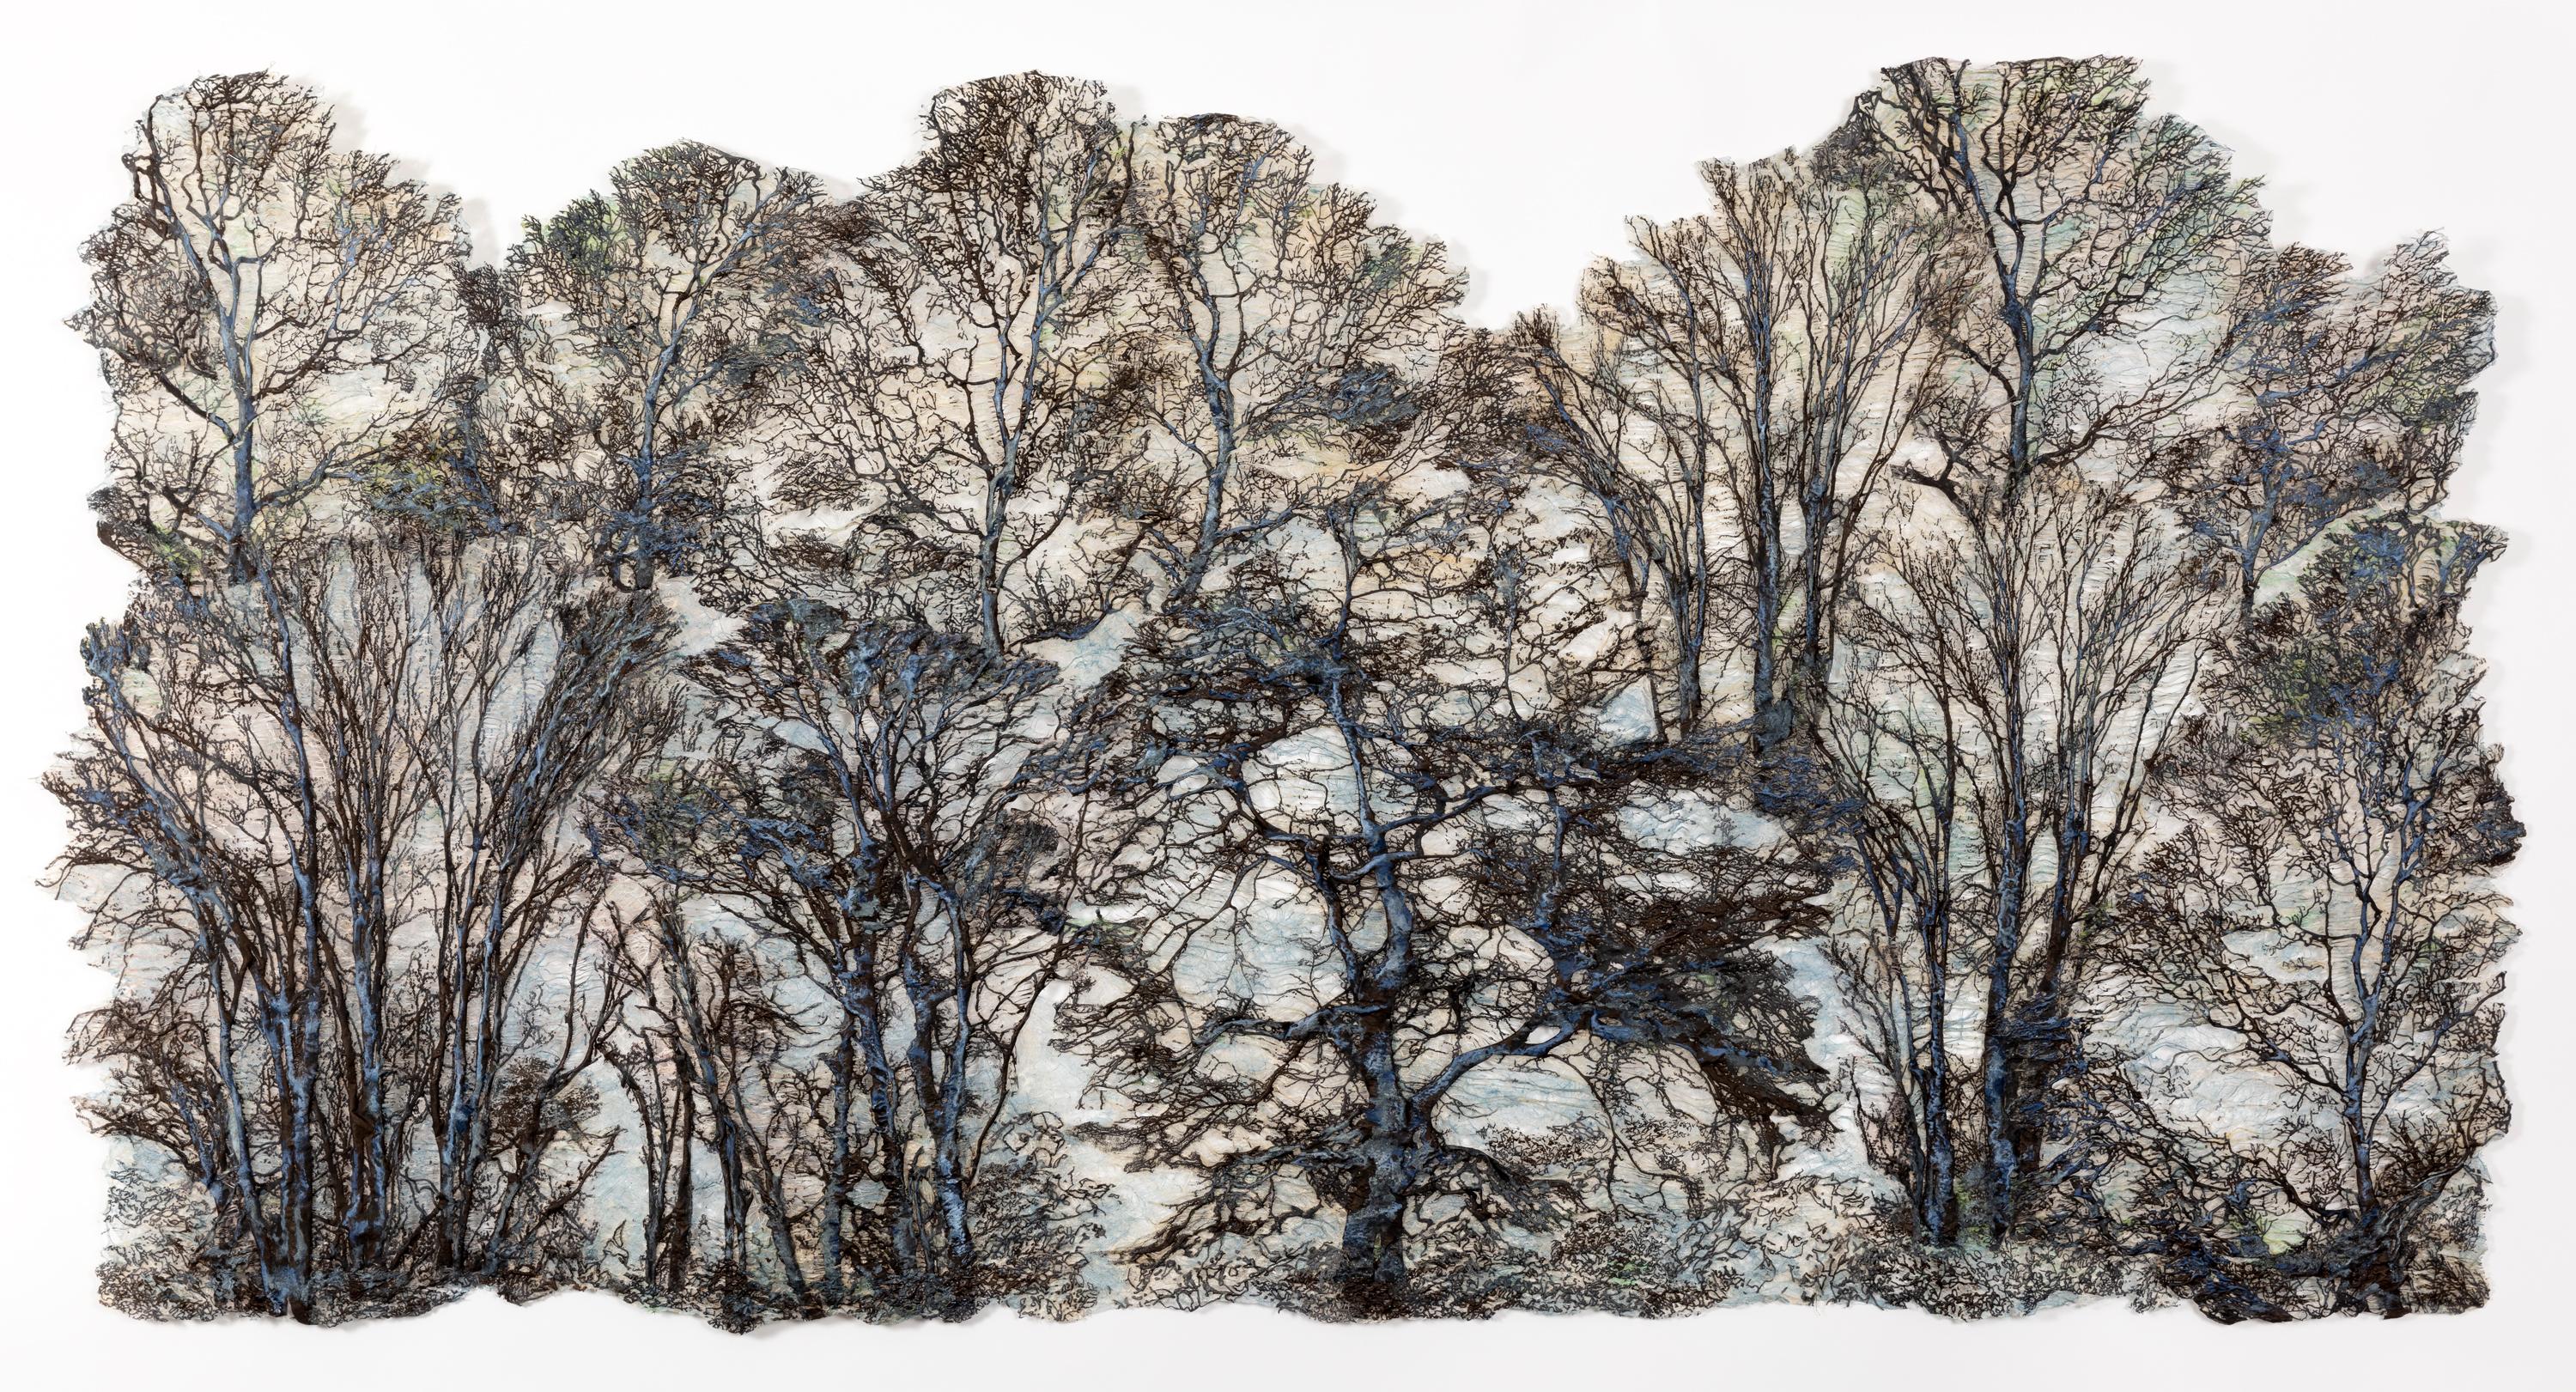 "Blue Mist Forest", Contemporary, Mixed Media, Wall Hanging, Tree-line, Fiber - Sculpture by Lesley Richmond